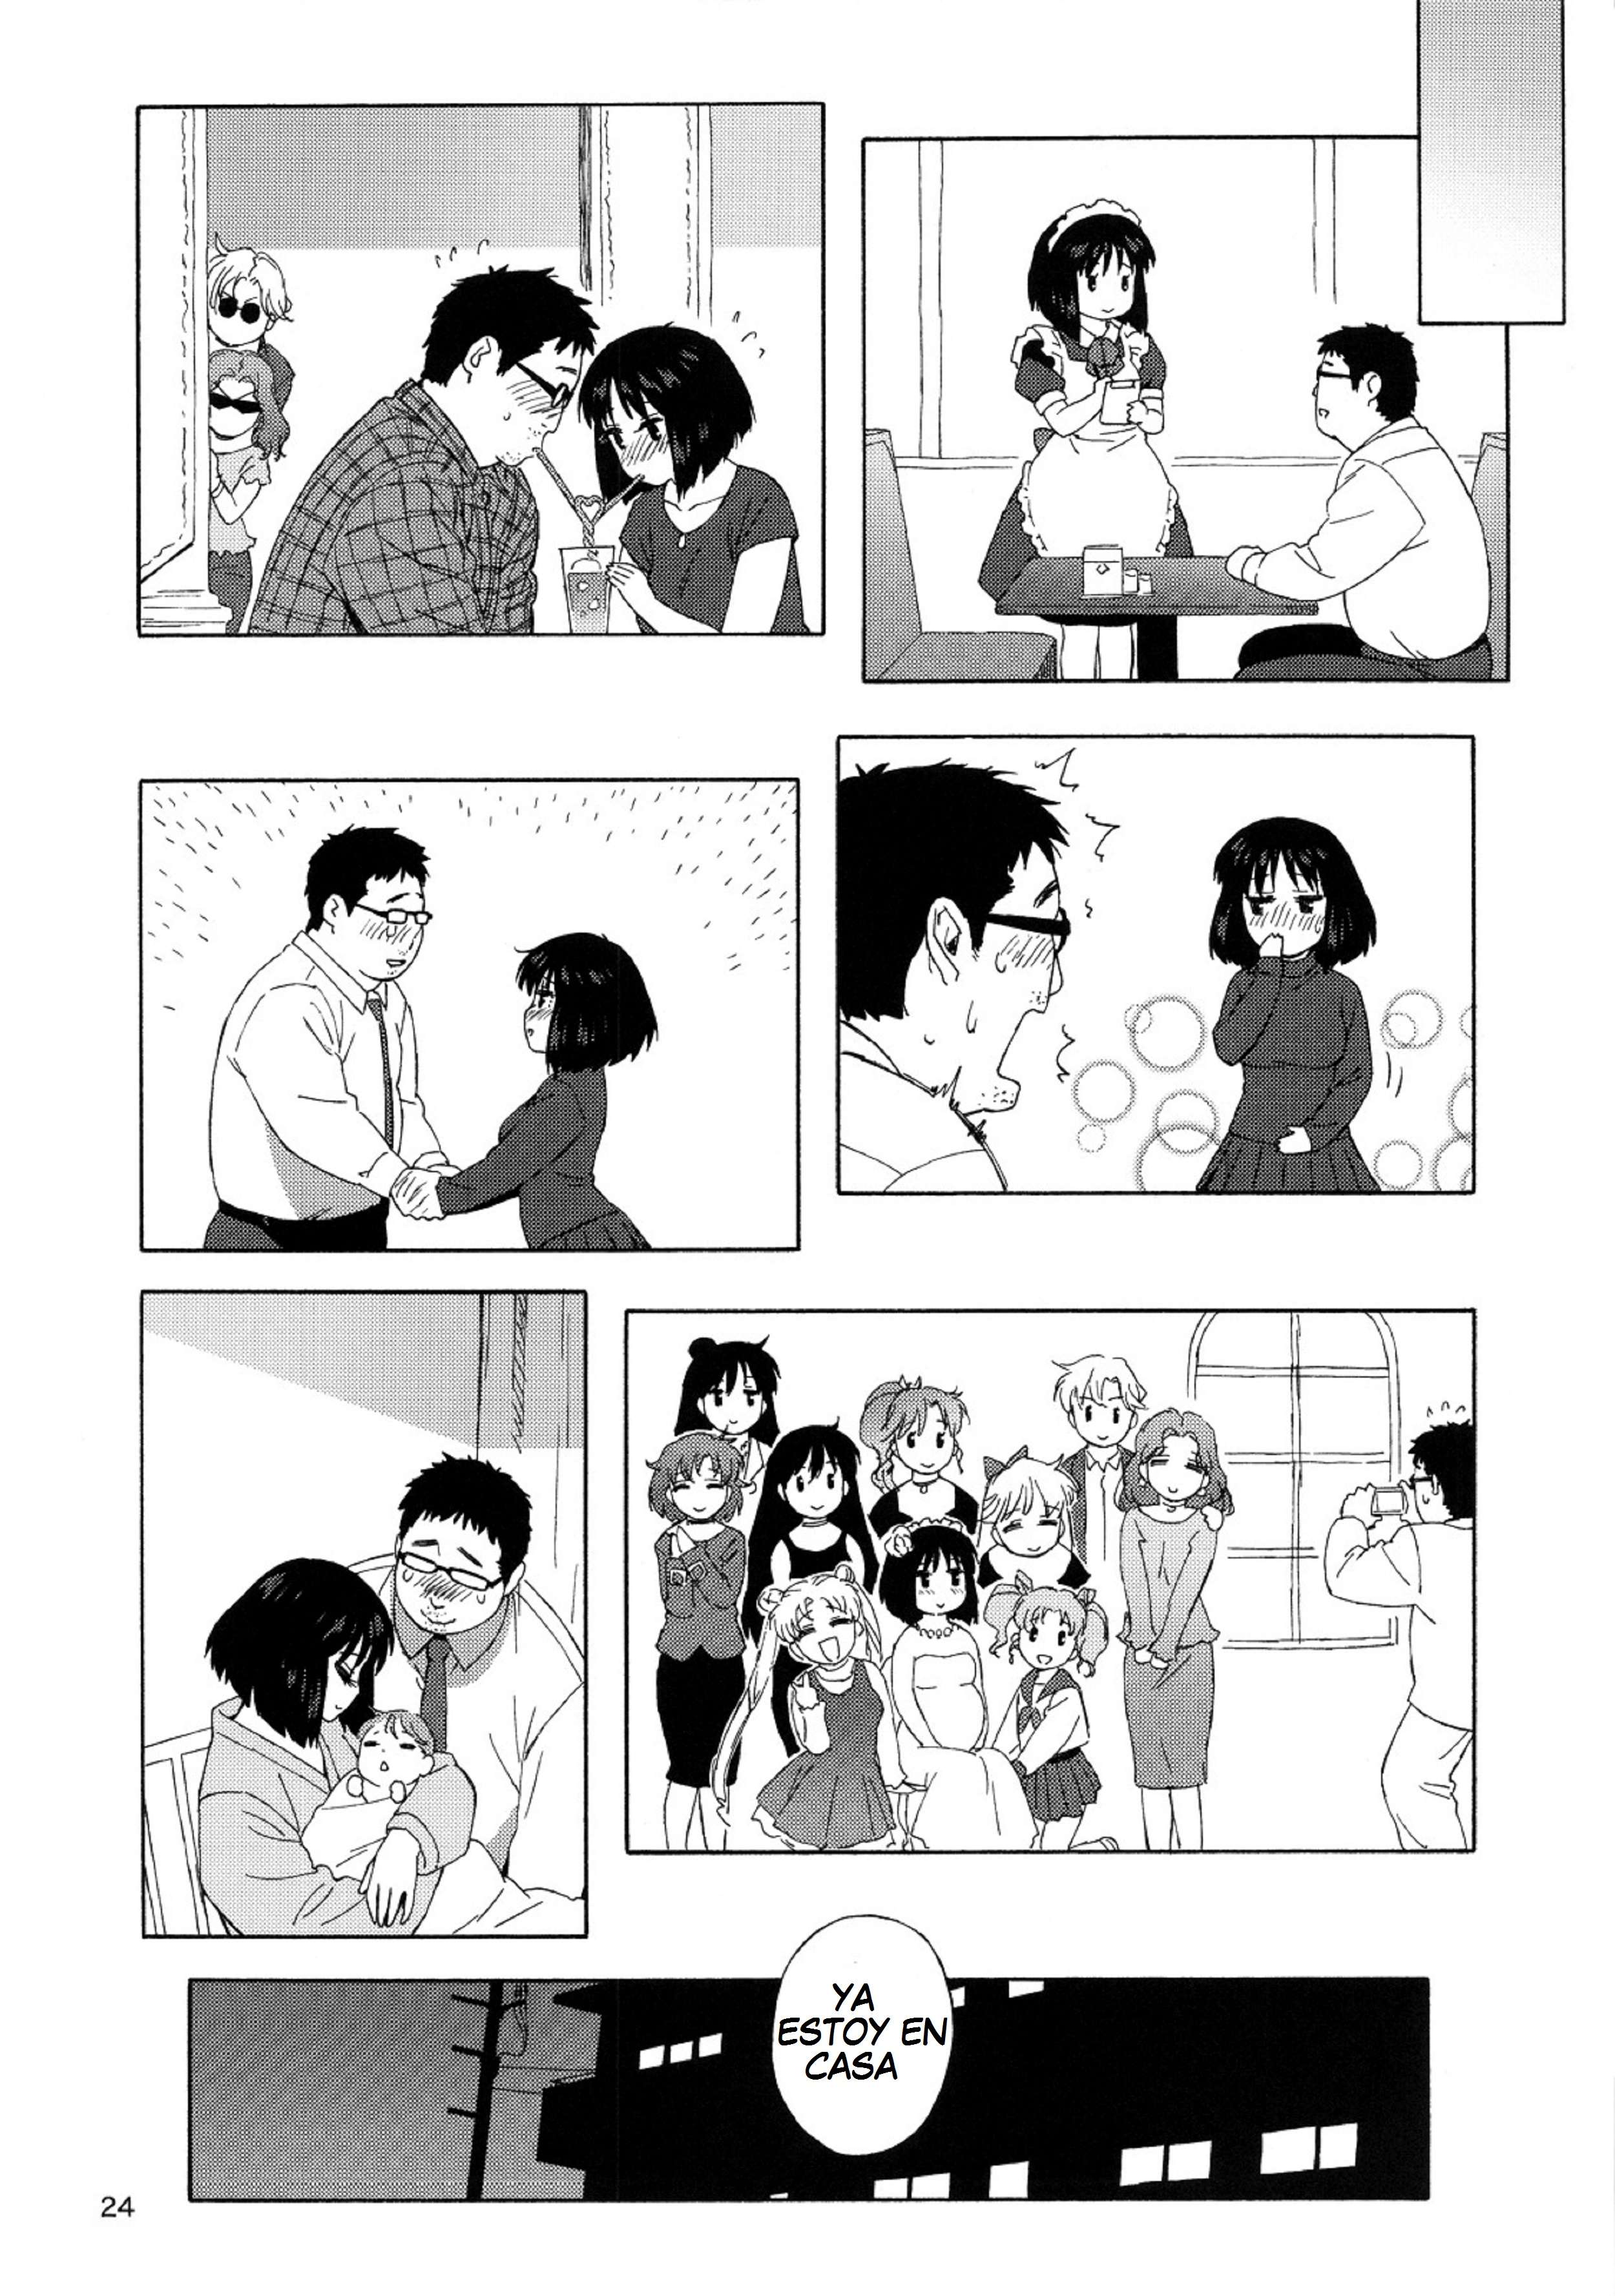 A Method to Marry Hotaru-chan the JK Chapter-1 - 22